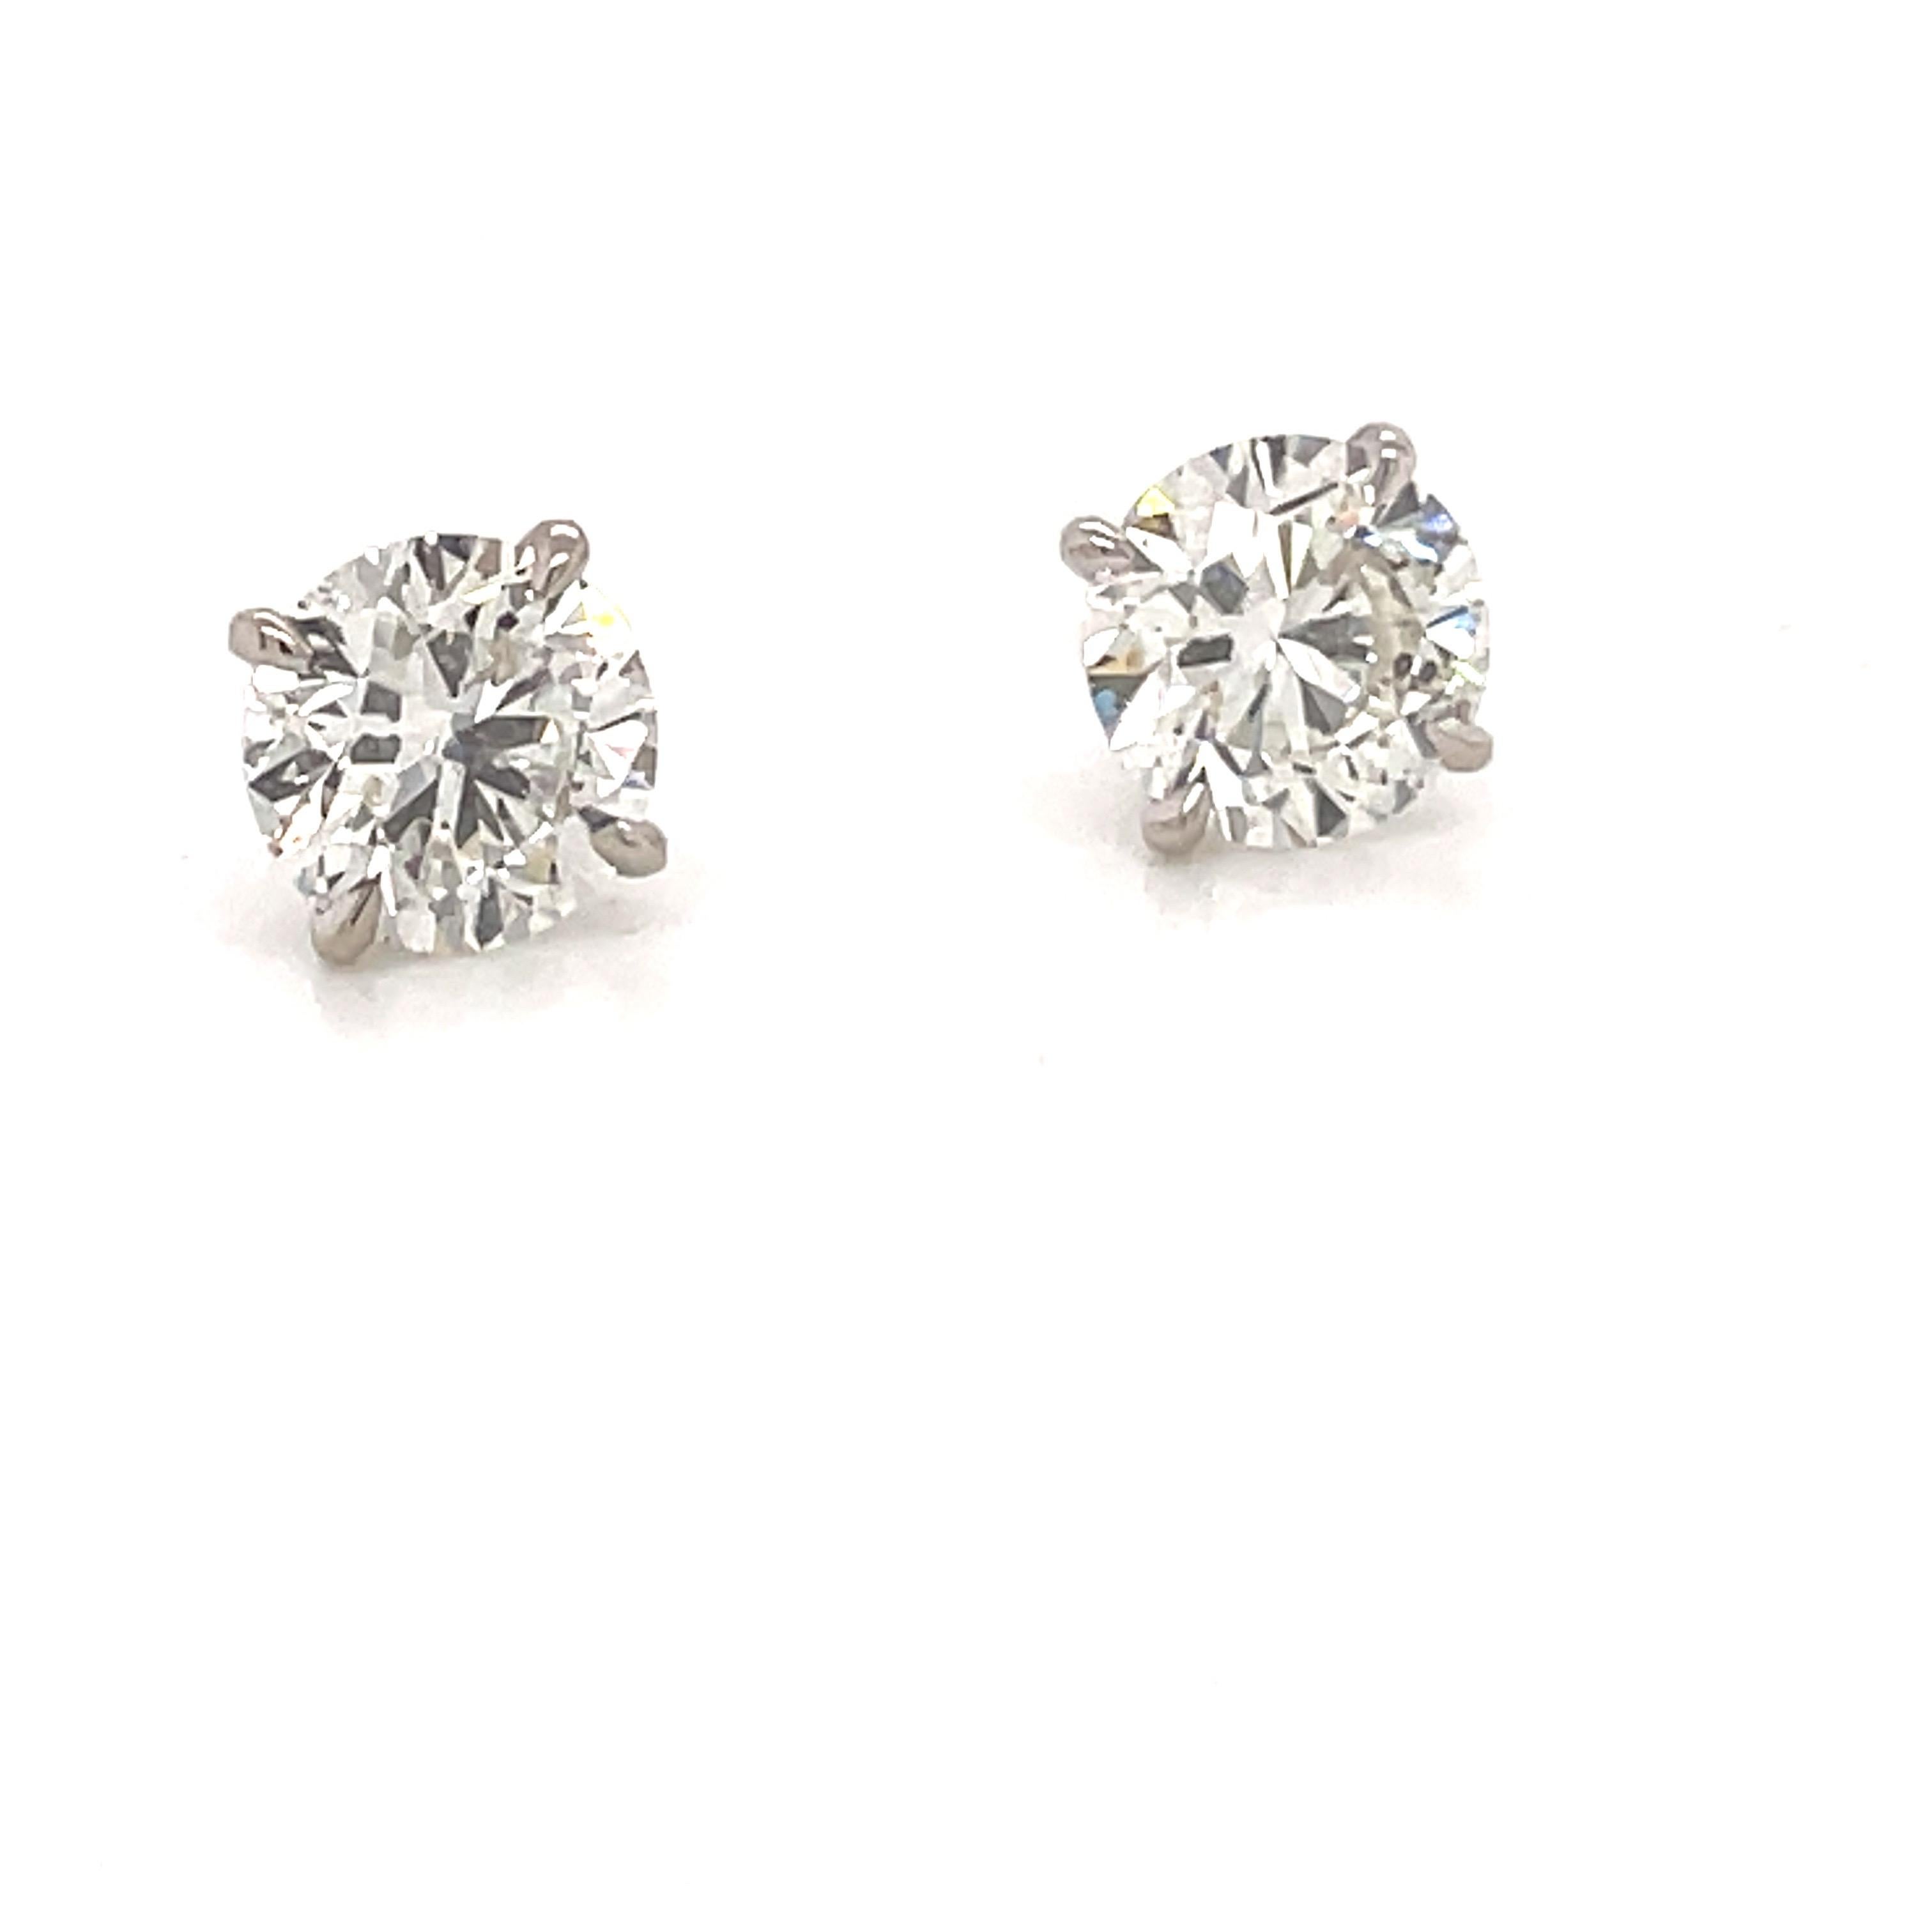 Diamond stud earrings weighing 3.03 carats in a 4 prong champagne setting, 18K White gold.
Color J
Clarity SI3-I1

Very Lively stones, clean to the naked eye.